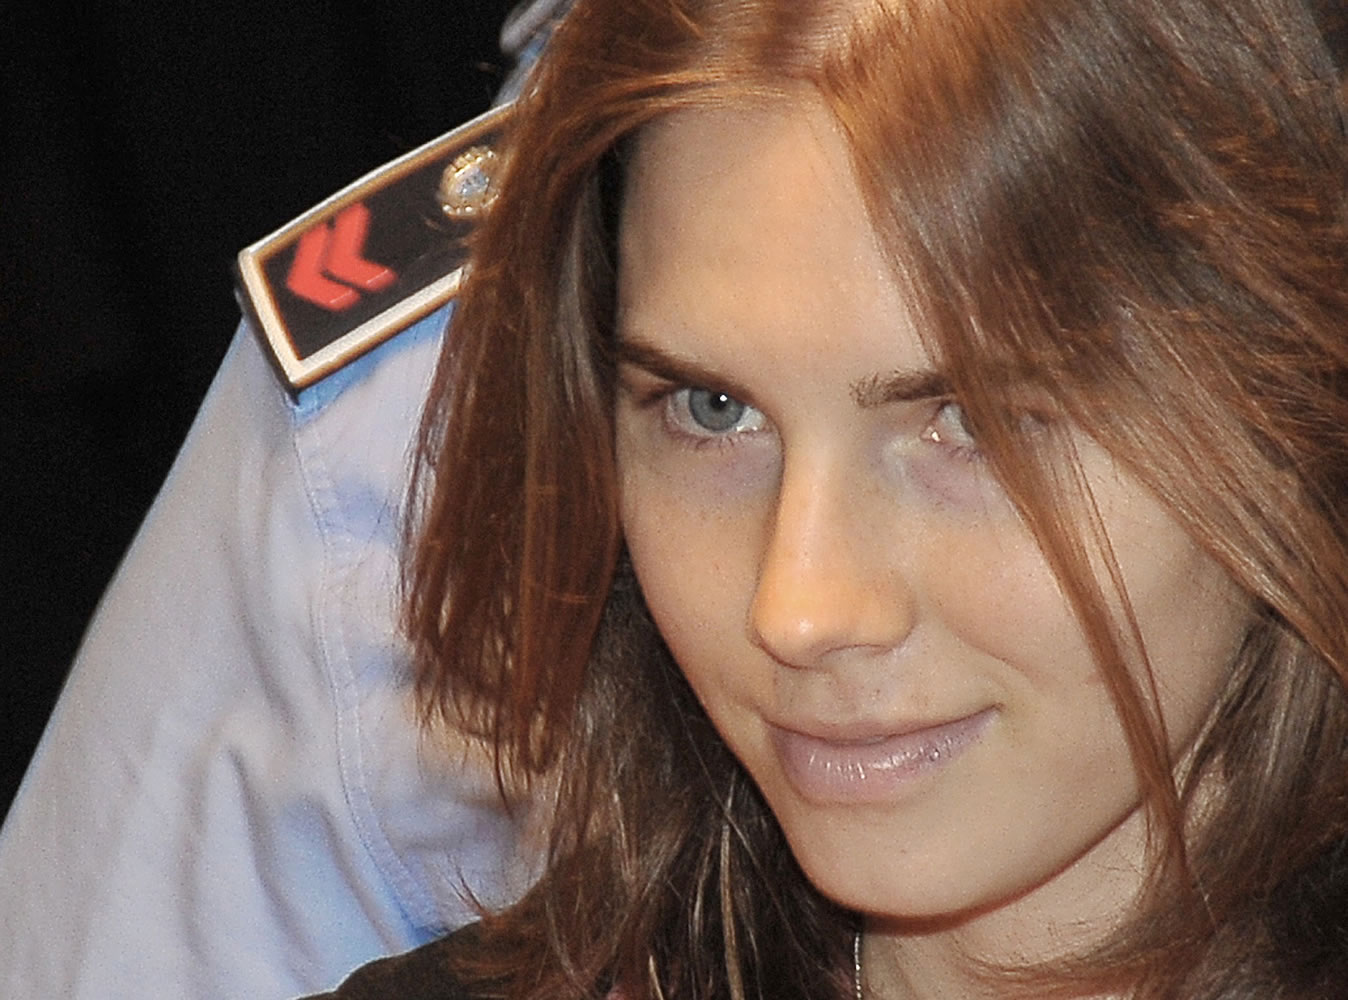 Amanda Knox arrives at the courthouse for the appeal trial in Perugia, Italy, on Sept. 23, 2011.